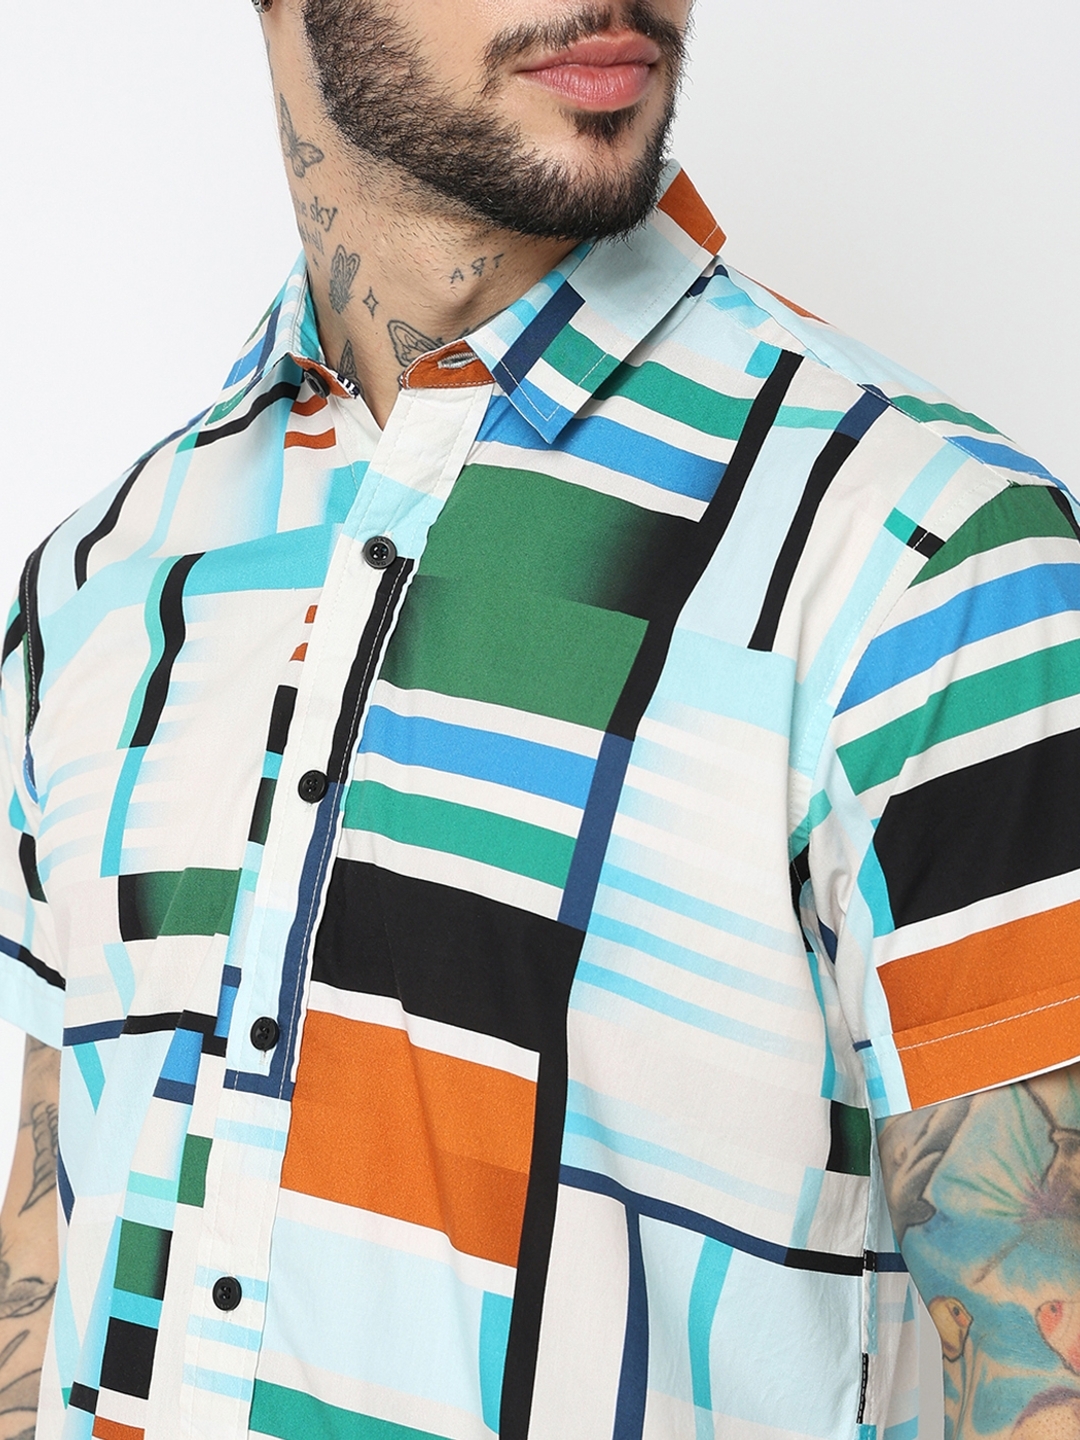 Relaxed Fit Half Sleeve Printed Shirts